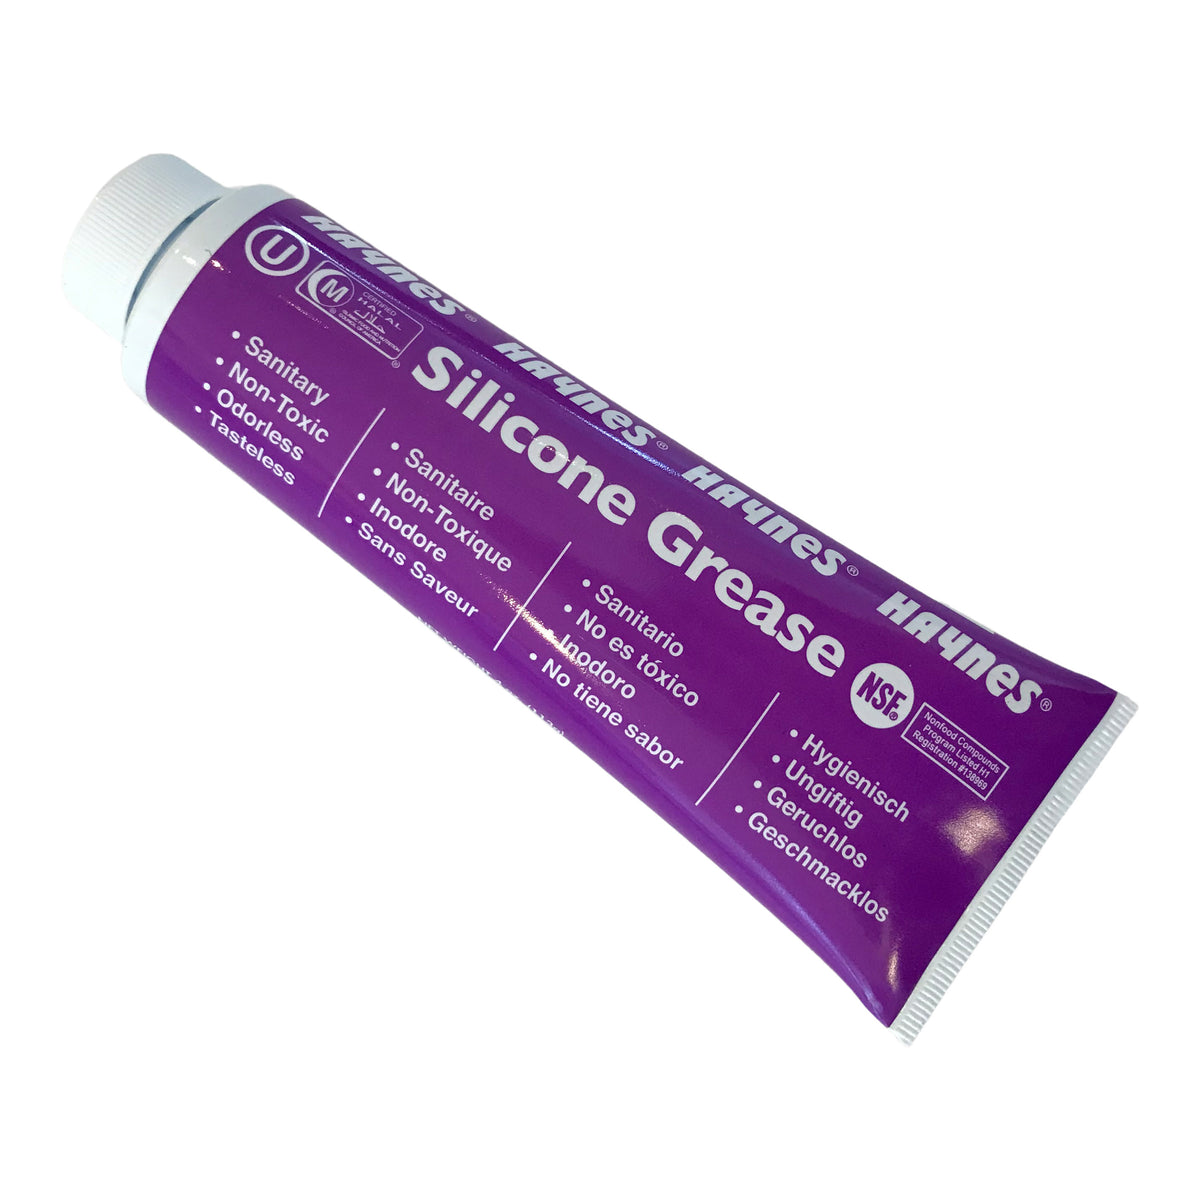 Plumbers Secret Clear Silicone Grease 113 g 